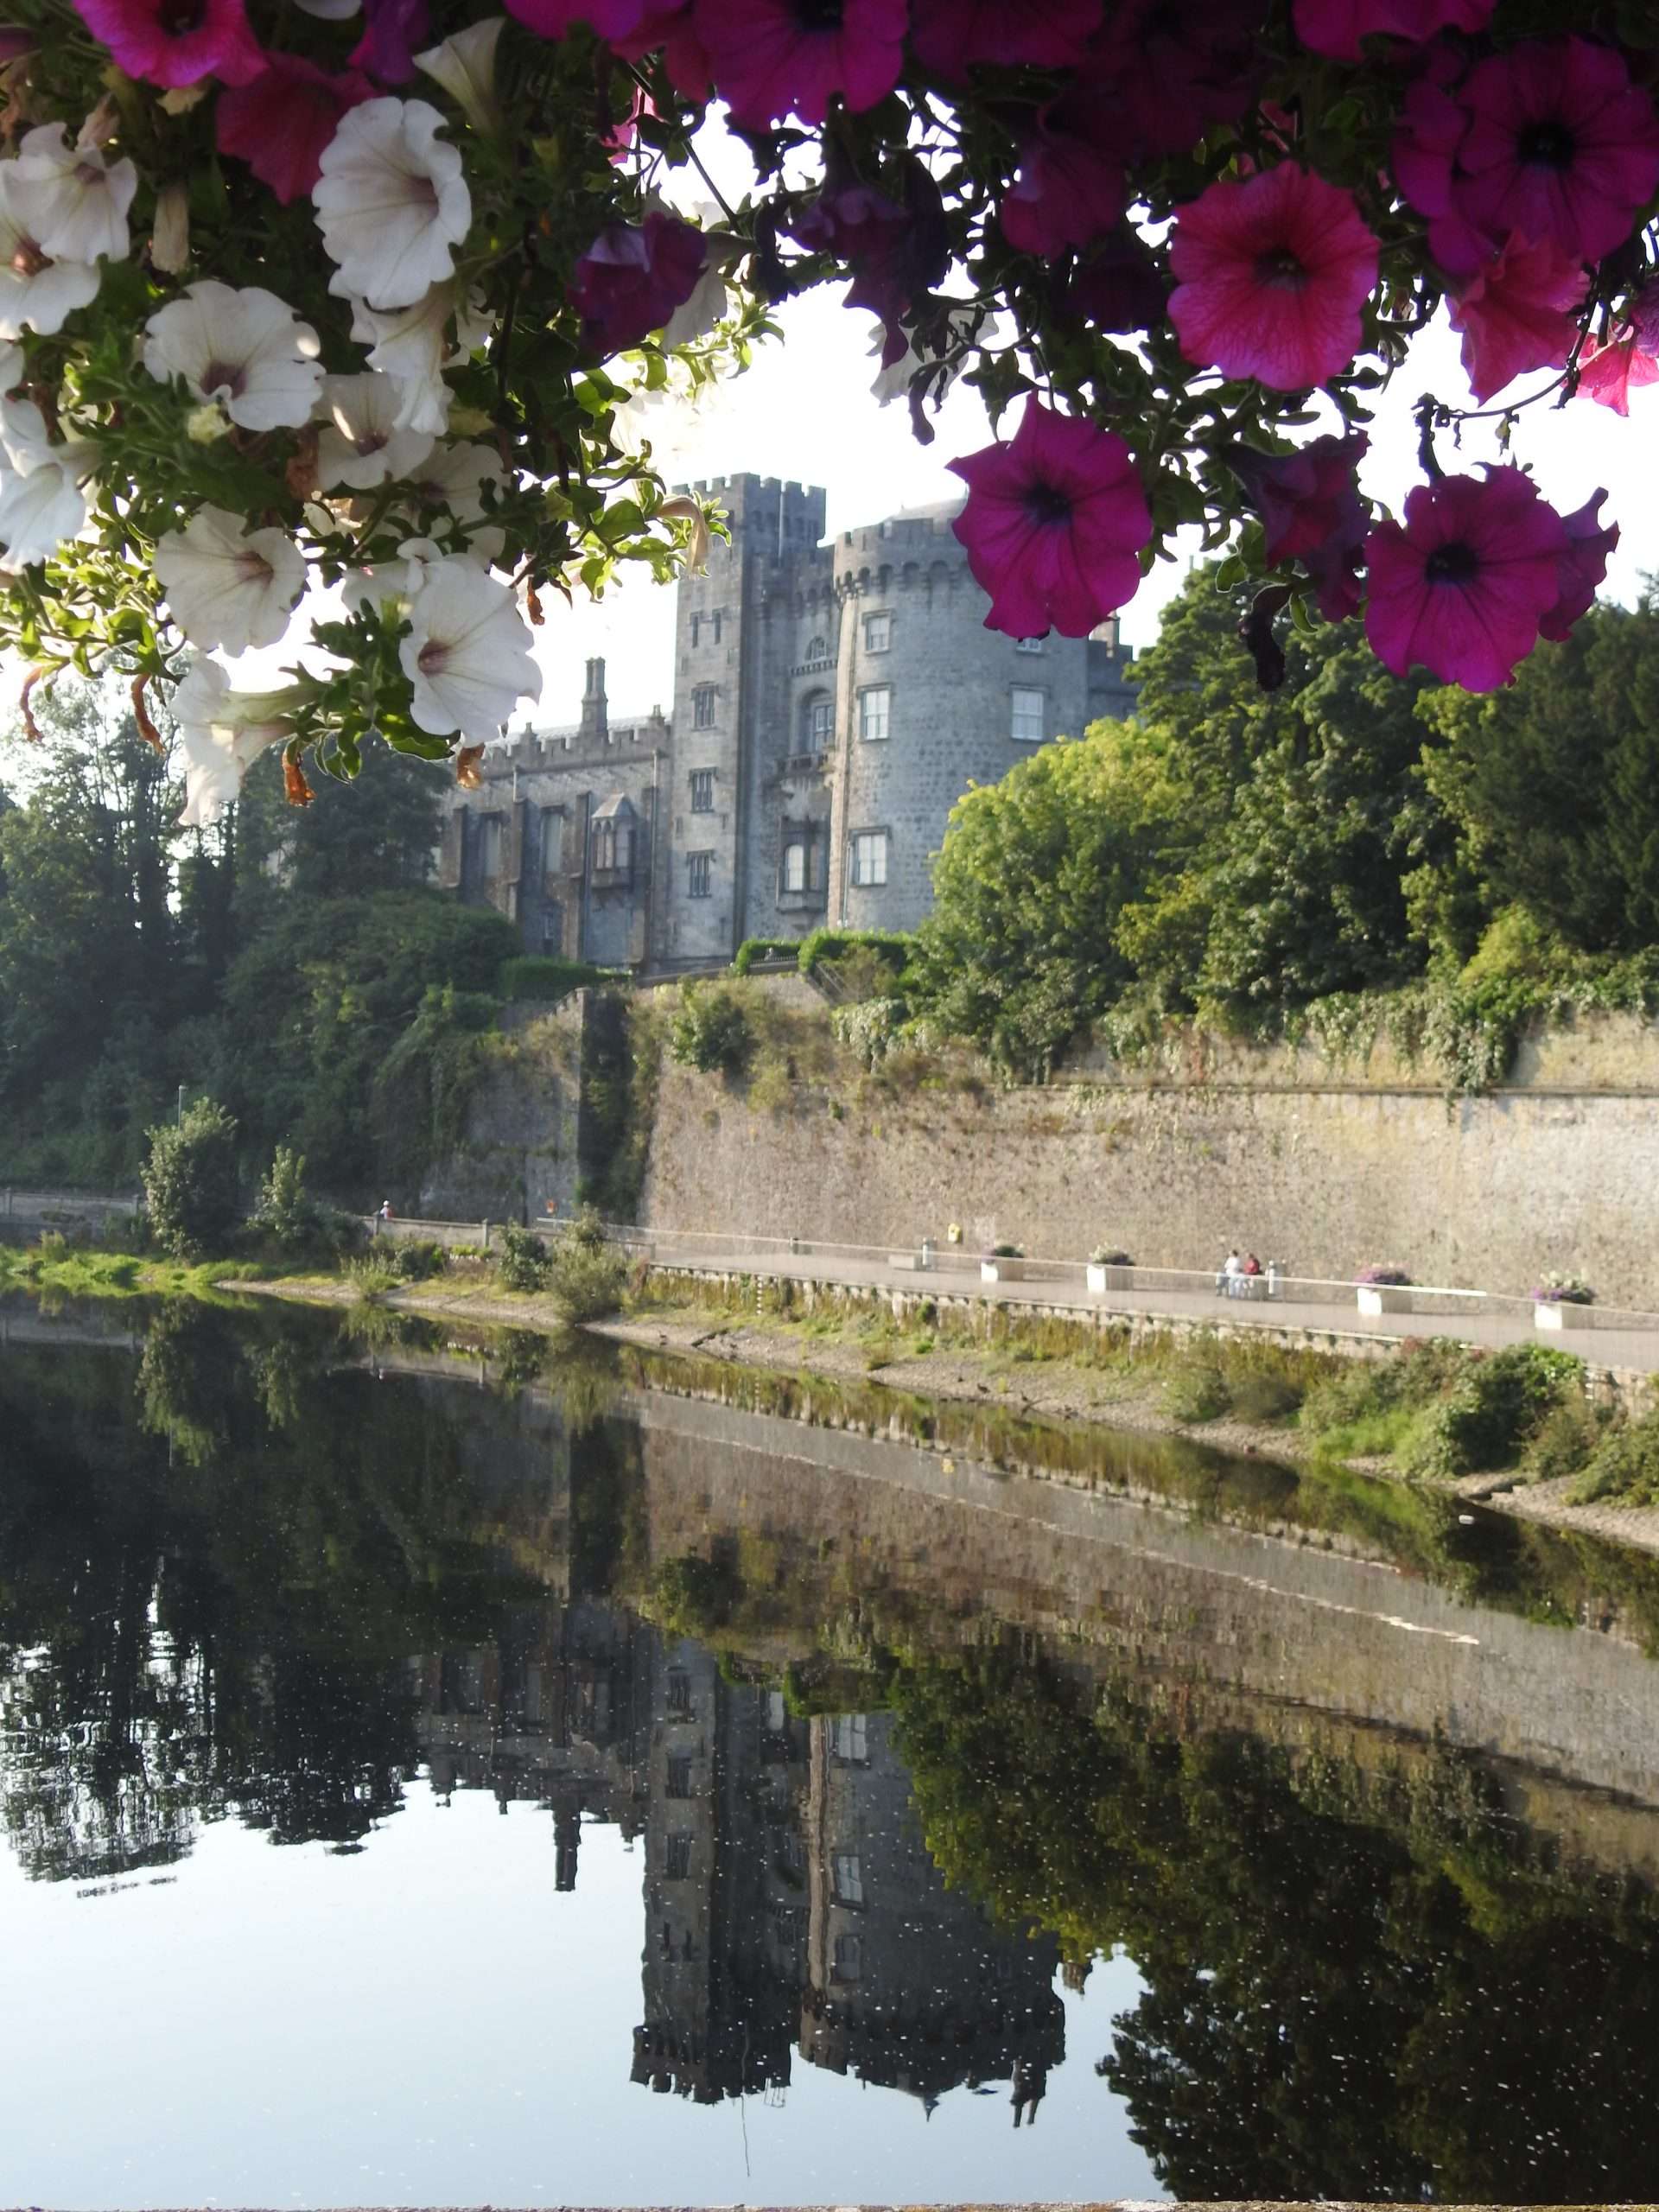 View of Kilkenny castle reflected in the river Nore and framed by white and pink Petunia flowers